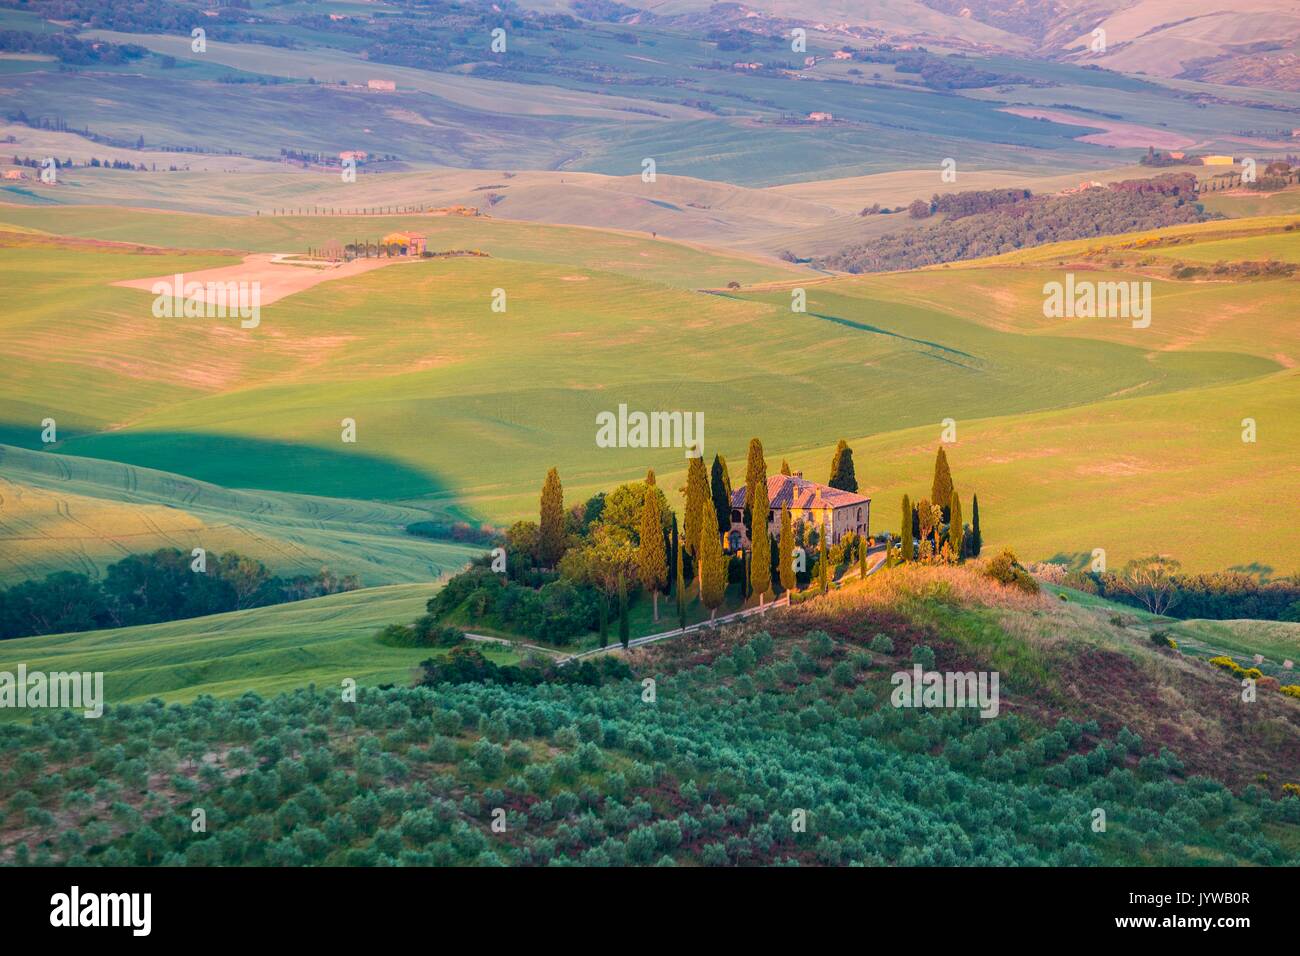 Podere Belvedere,San Quirico d'Orcia, Tuscany, Italy Stock Photo